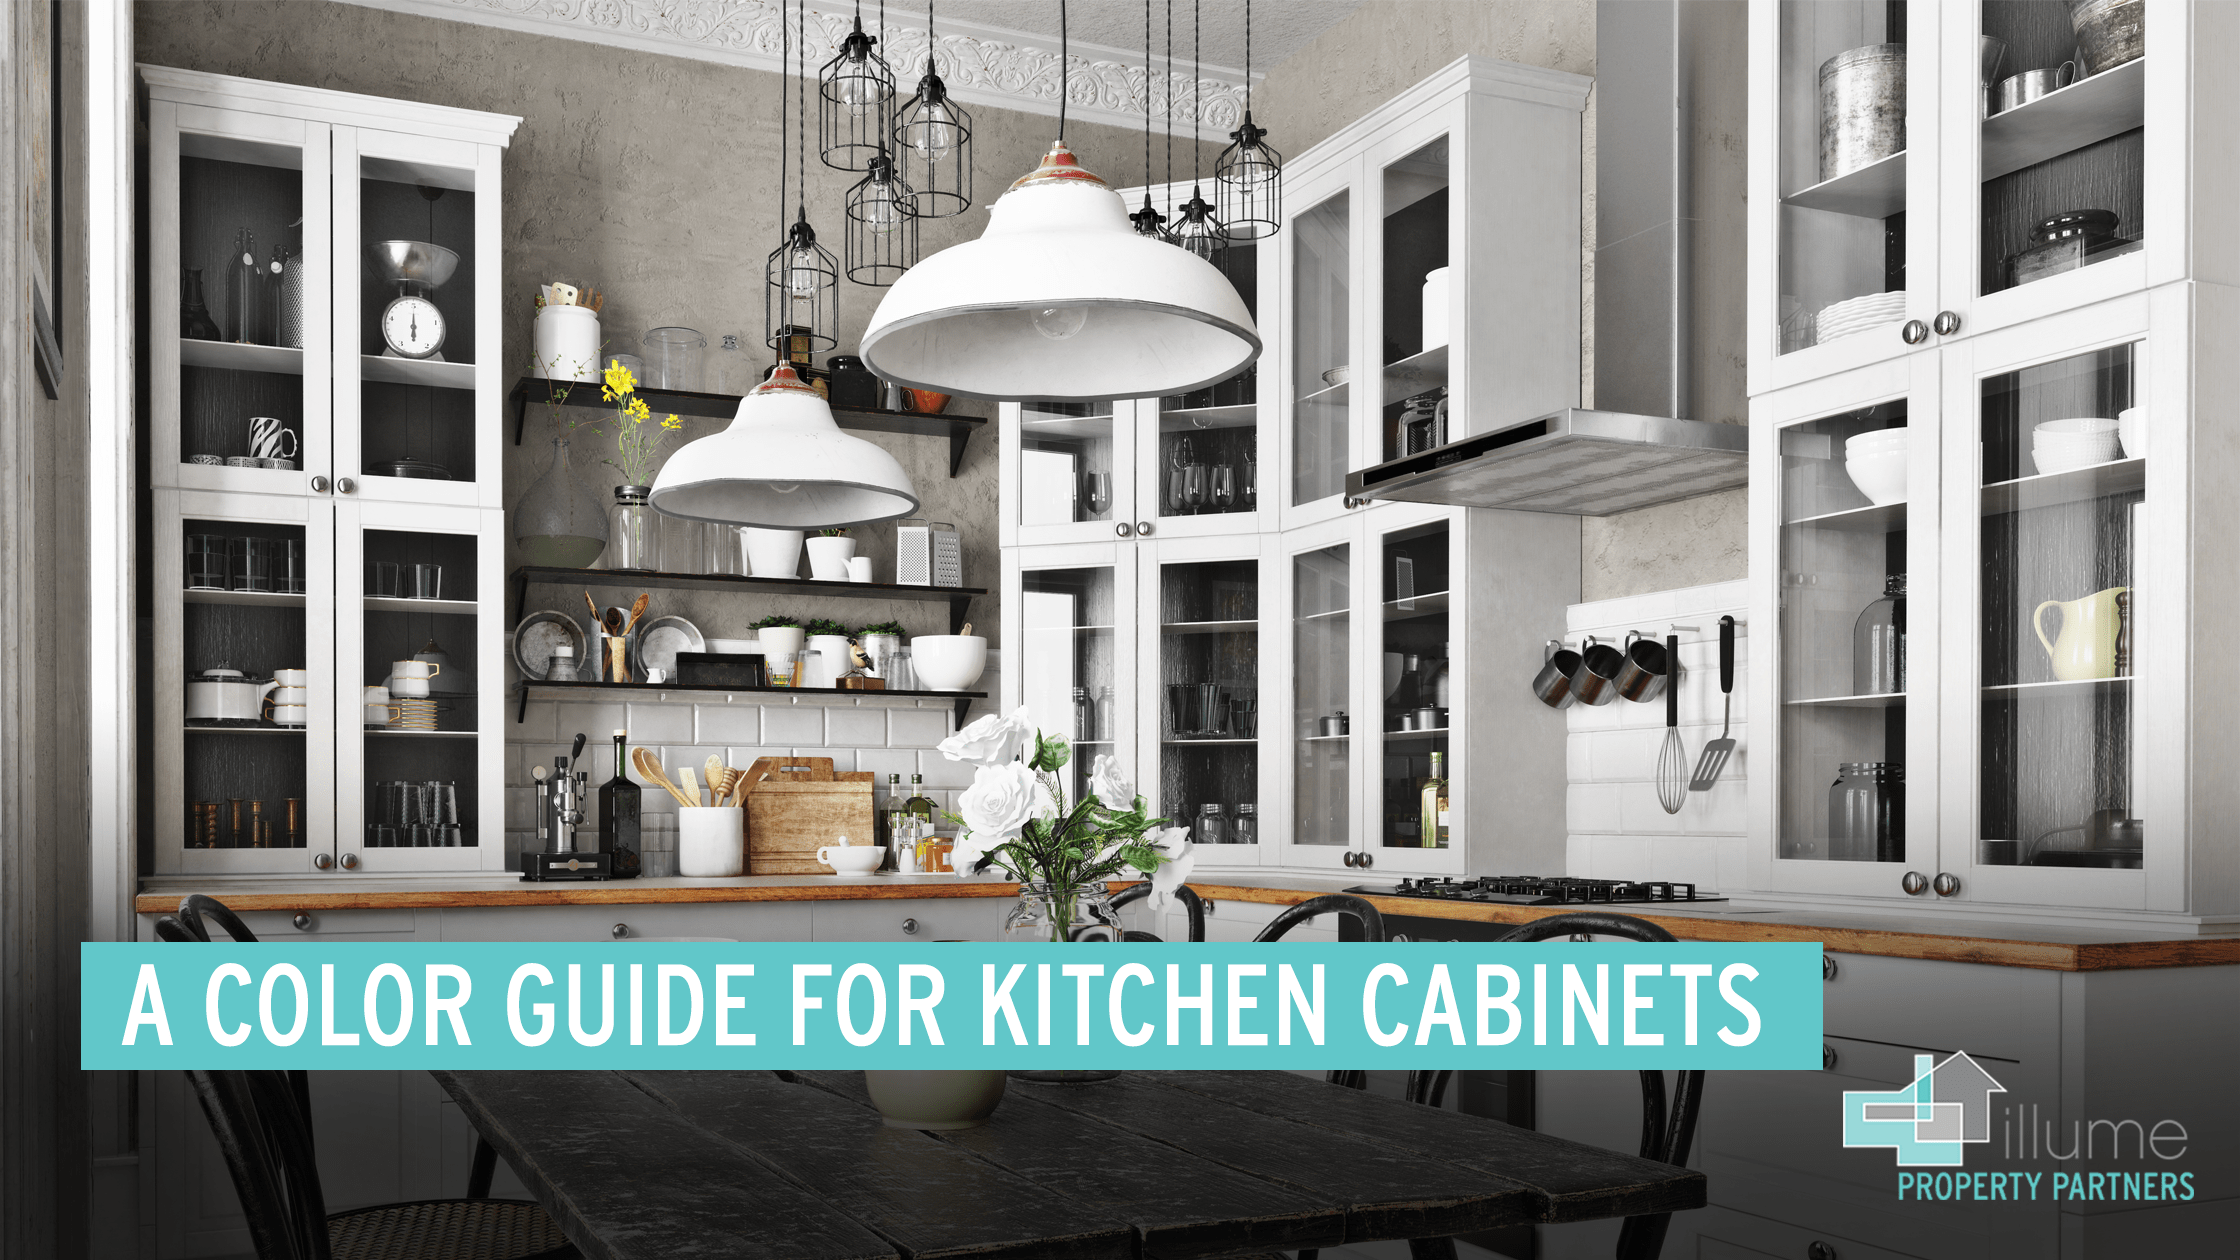 A Color Guide for Kitchen Cabinets